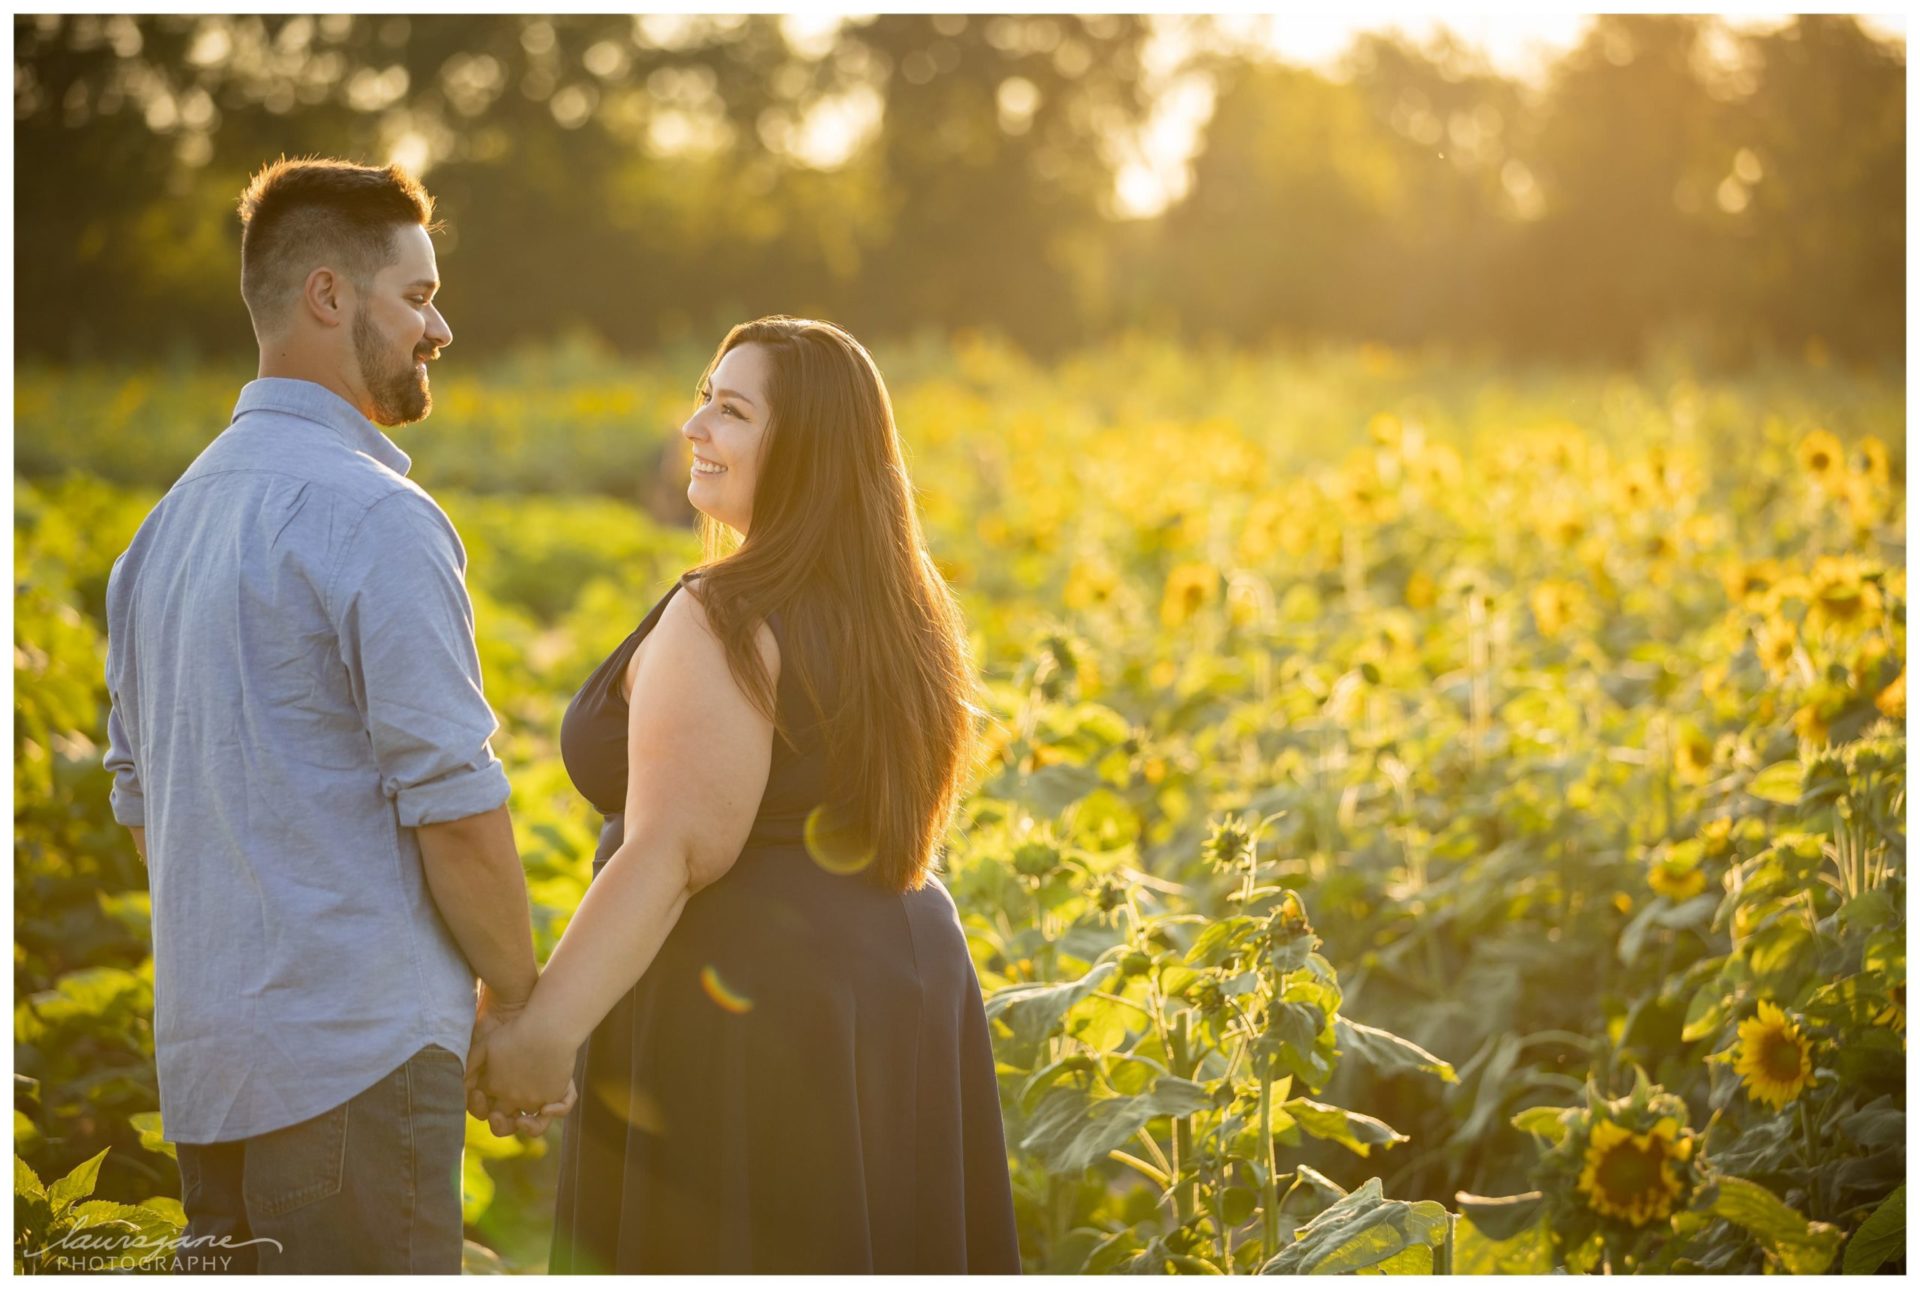 Engagement Portraits by Sussex Wedding Photographer